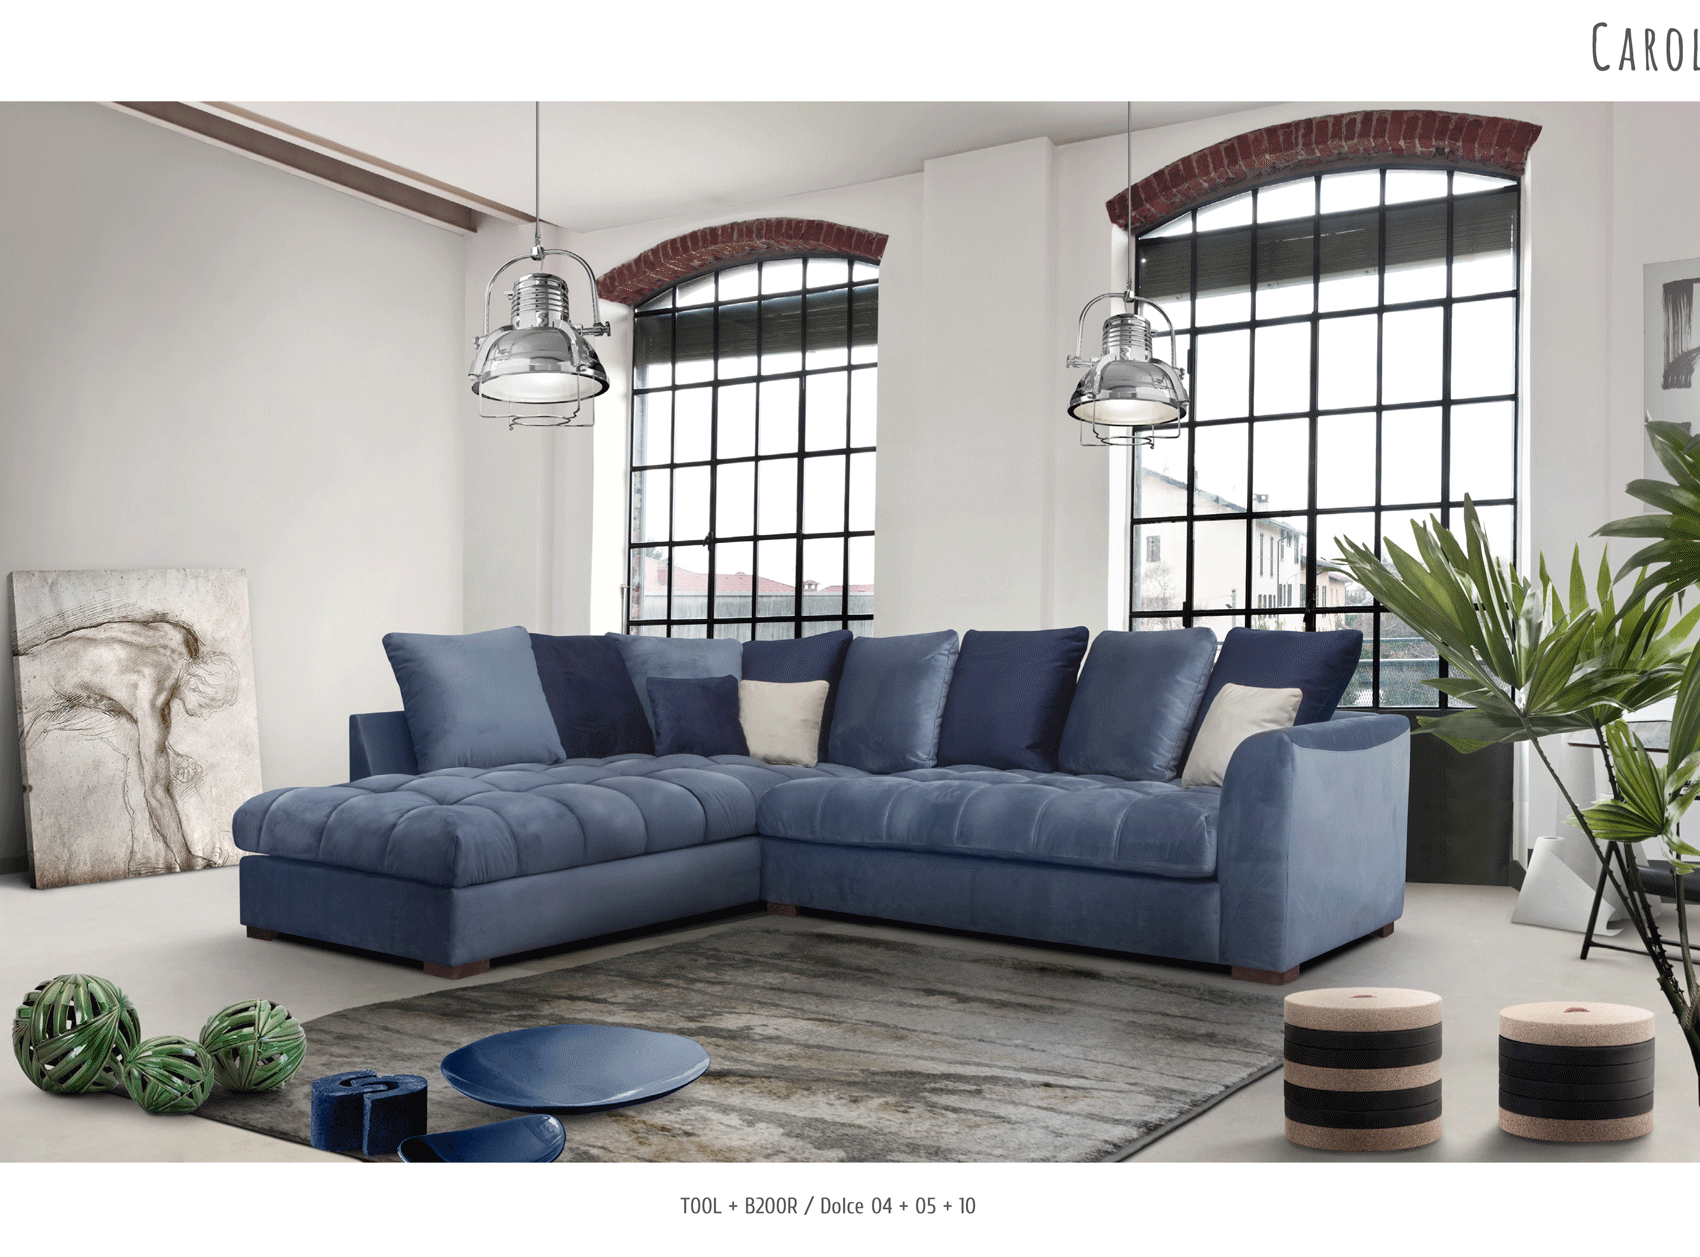 Brands Arredoclassic Living Room, Italy Carol Sectional